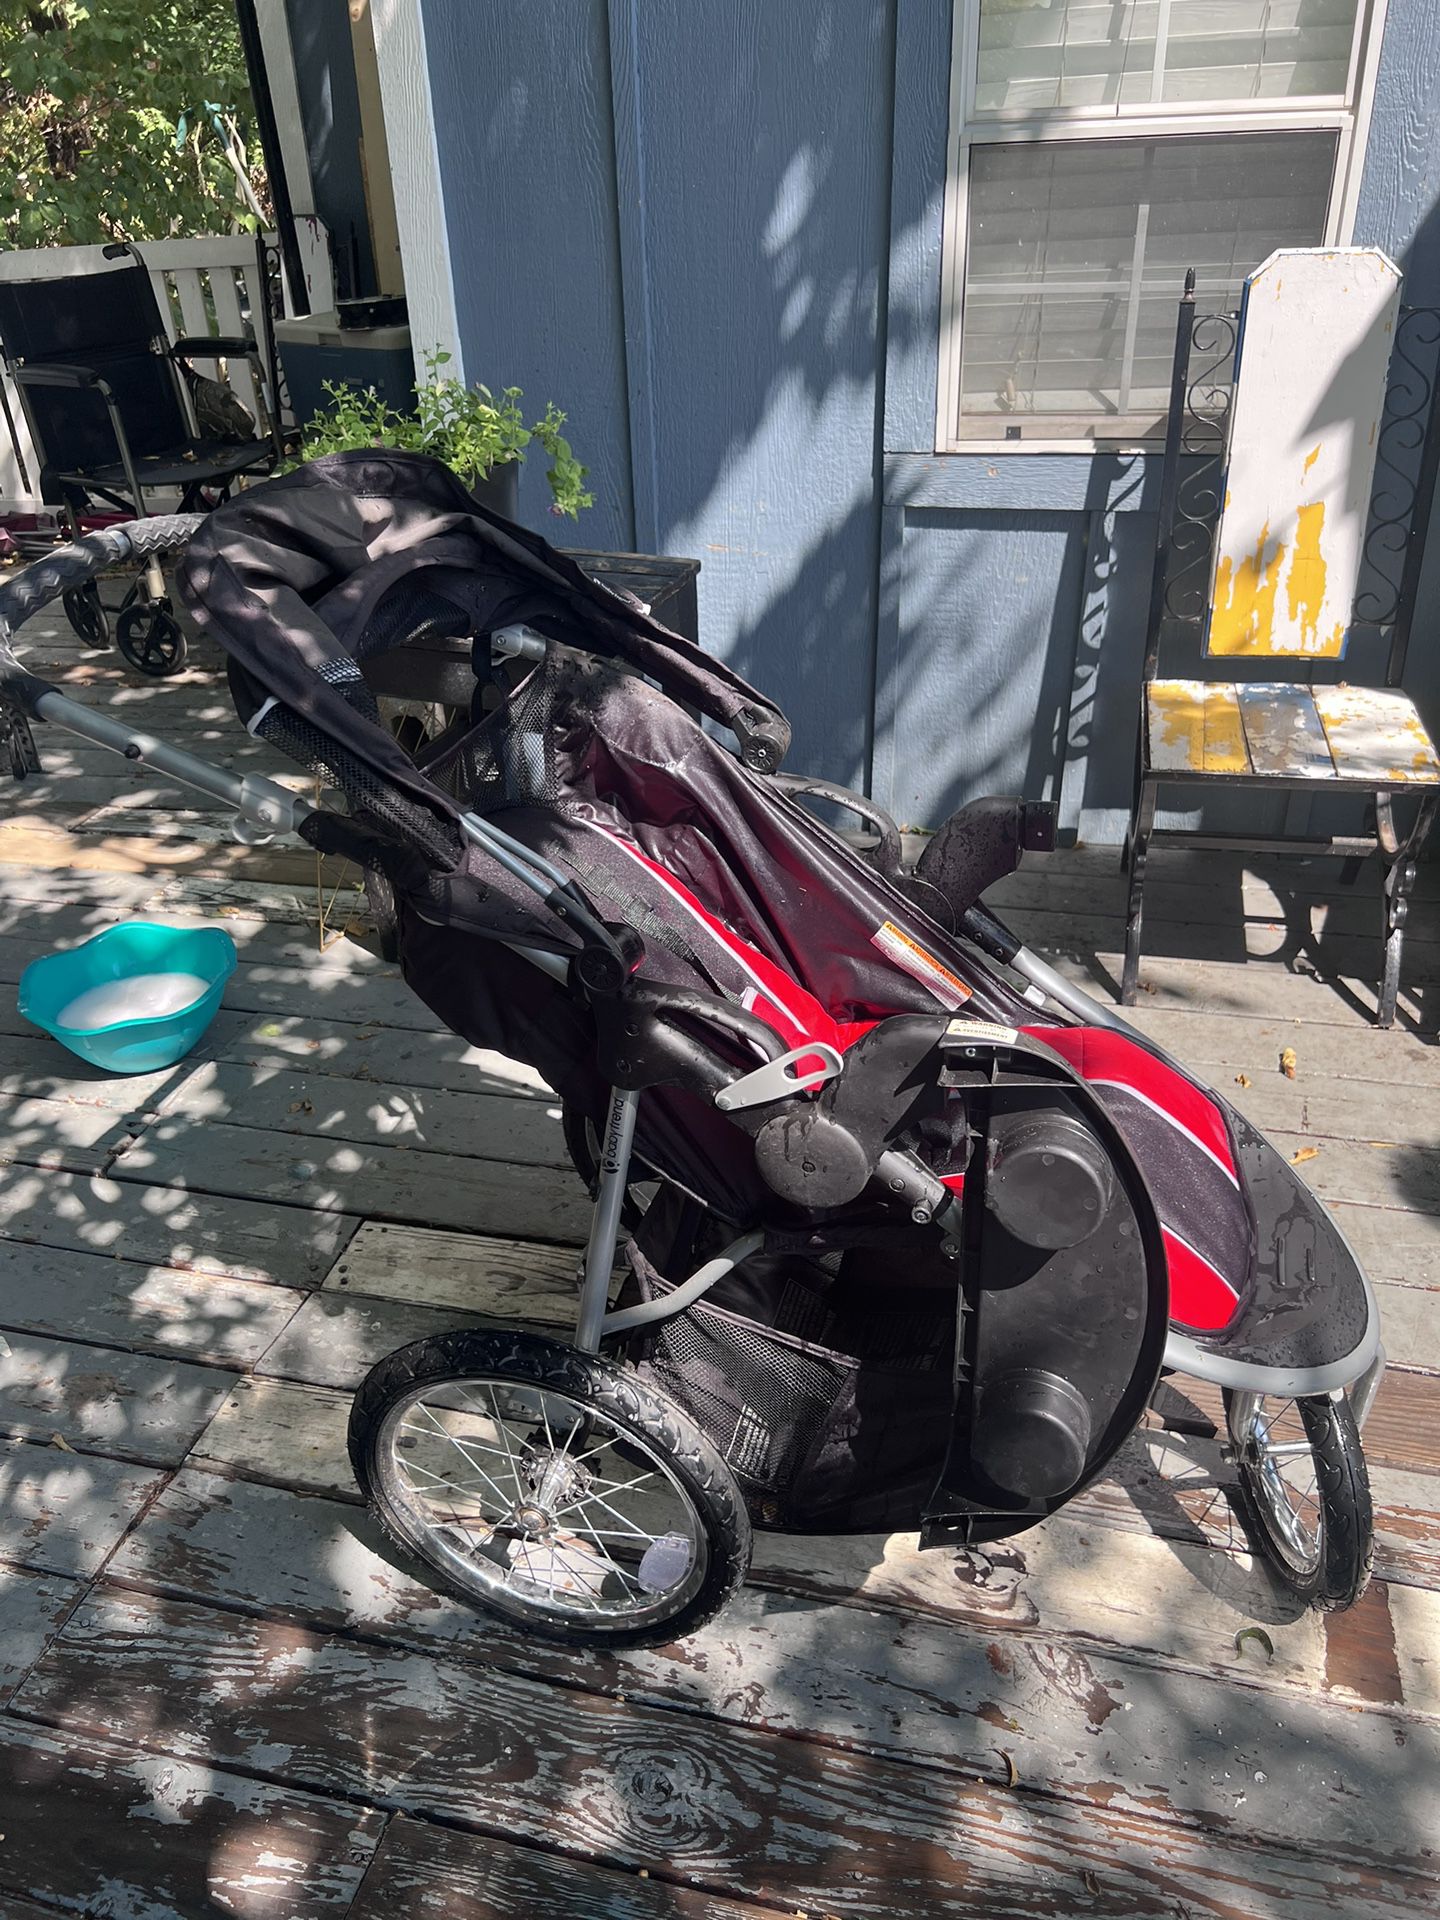 Red And Black Stroller